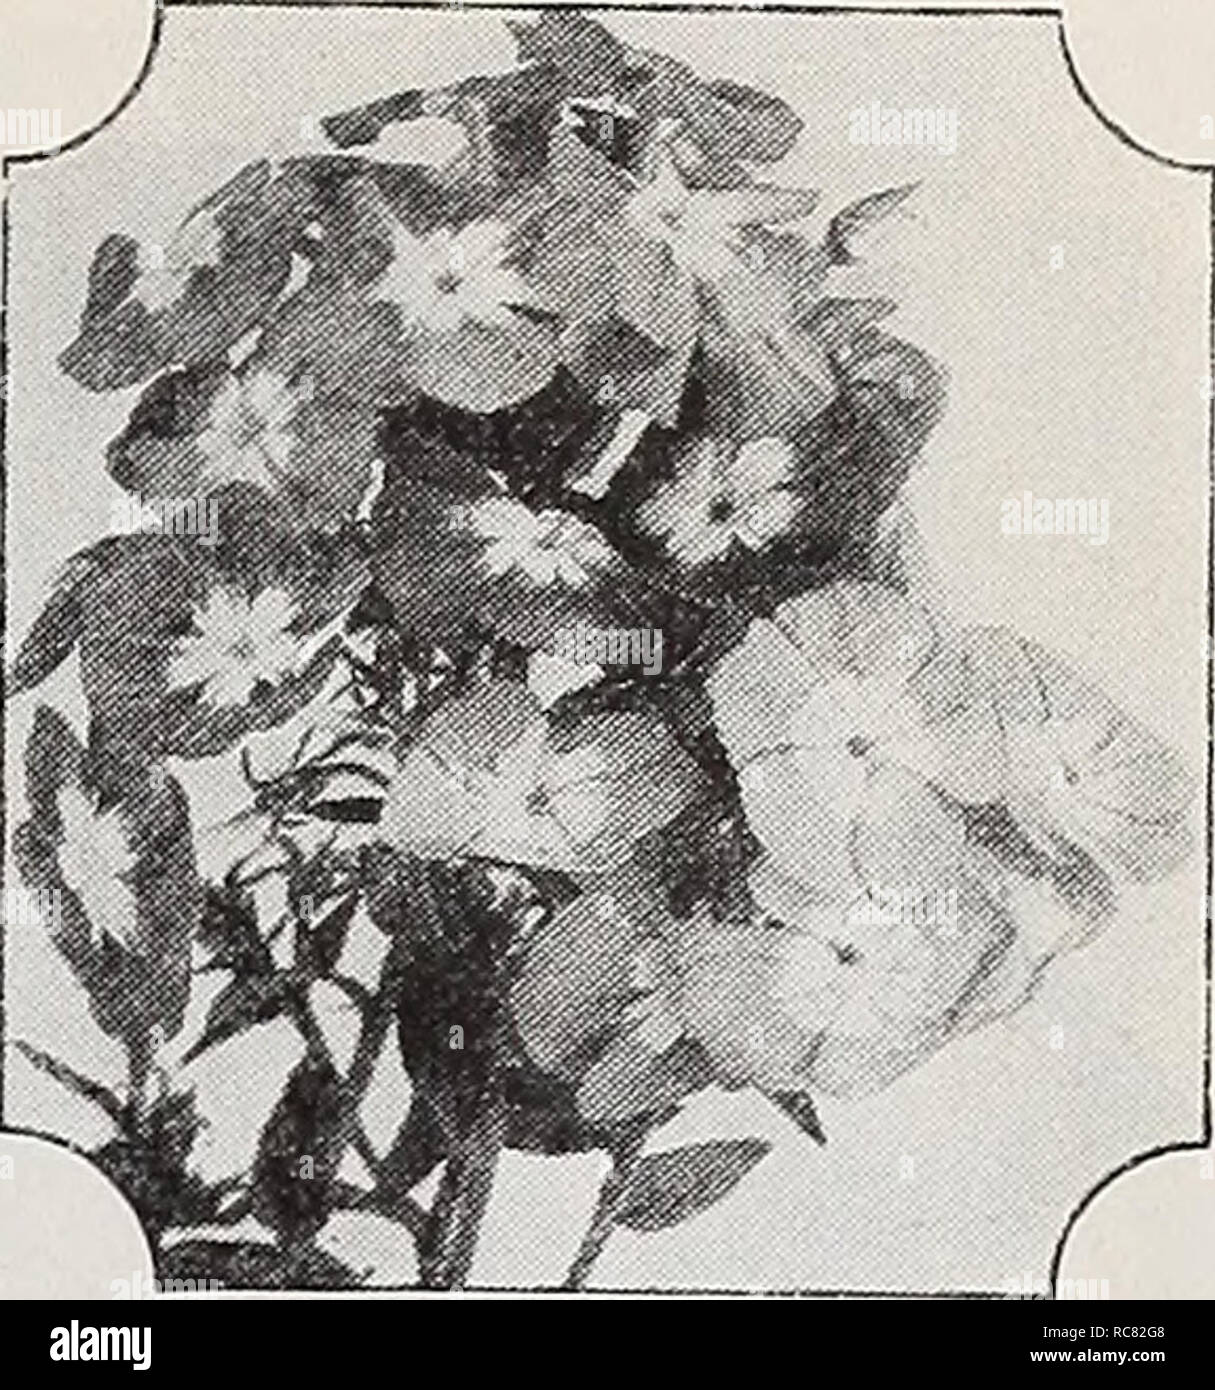 . Dreer's garden book for 1940. Seeds Catalogs; Nursery stock Catalogs; Gardening Equipment and supplies Catalogs; Flowers Seeds Catalogs; Vegetables Seeds Catalogs; Fruit Seeds Catalogs. Oenothera missouriensis Oenothera d) &amp; n a Evening Primrose 3175 Missouriensis. [hp) A splendid hardy perennial for an exposed sunny position either in the border or the rockery. Large yellow flowers, fre- quently 5 inches in diameter, produced freely from June until August. 12 inches. Pkt. 20c; special pkt. 7Sc. Nierembergia ® a 3159 Coerulea {Hippomanica) {Blue Cups). A charming annual of easiest cultur Stock Photo